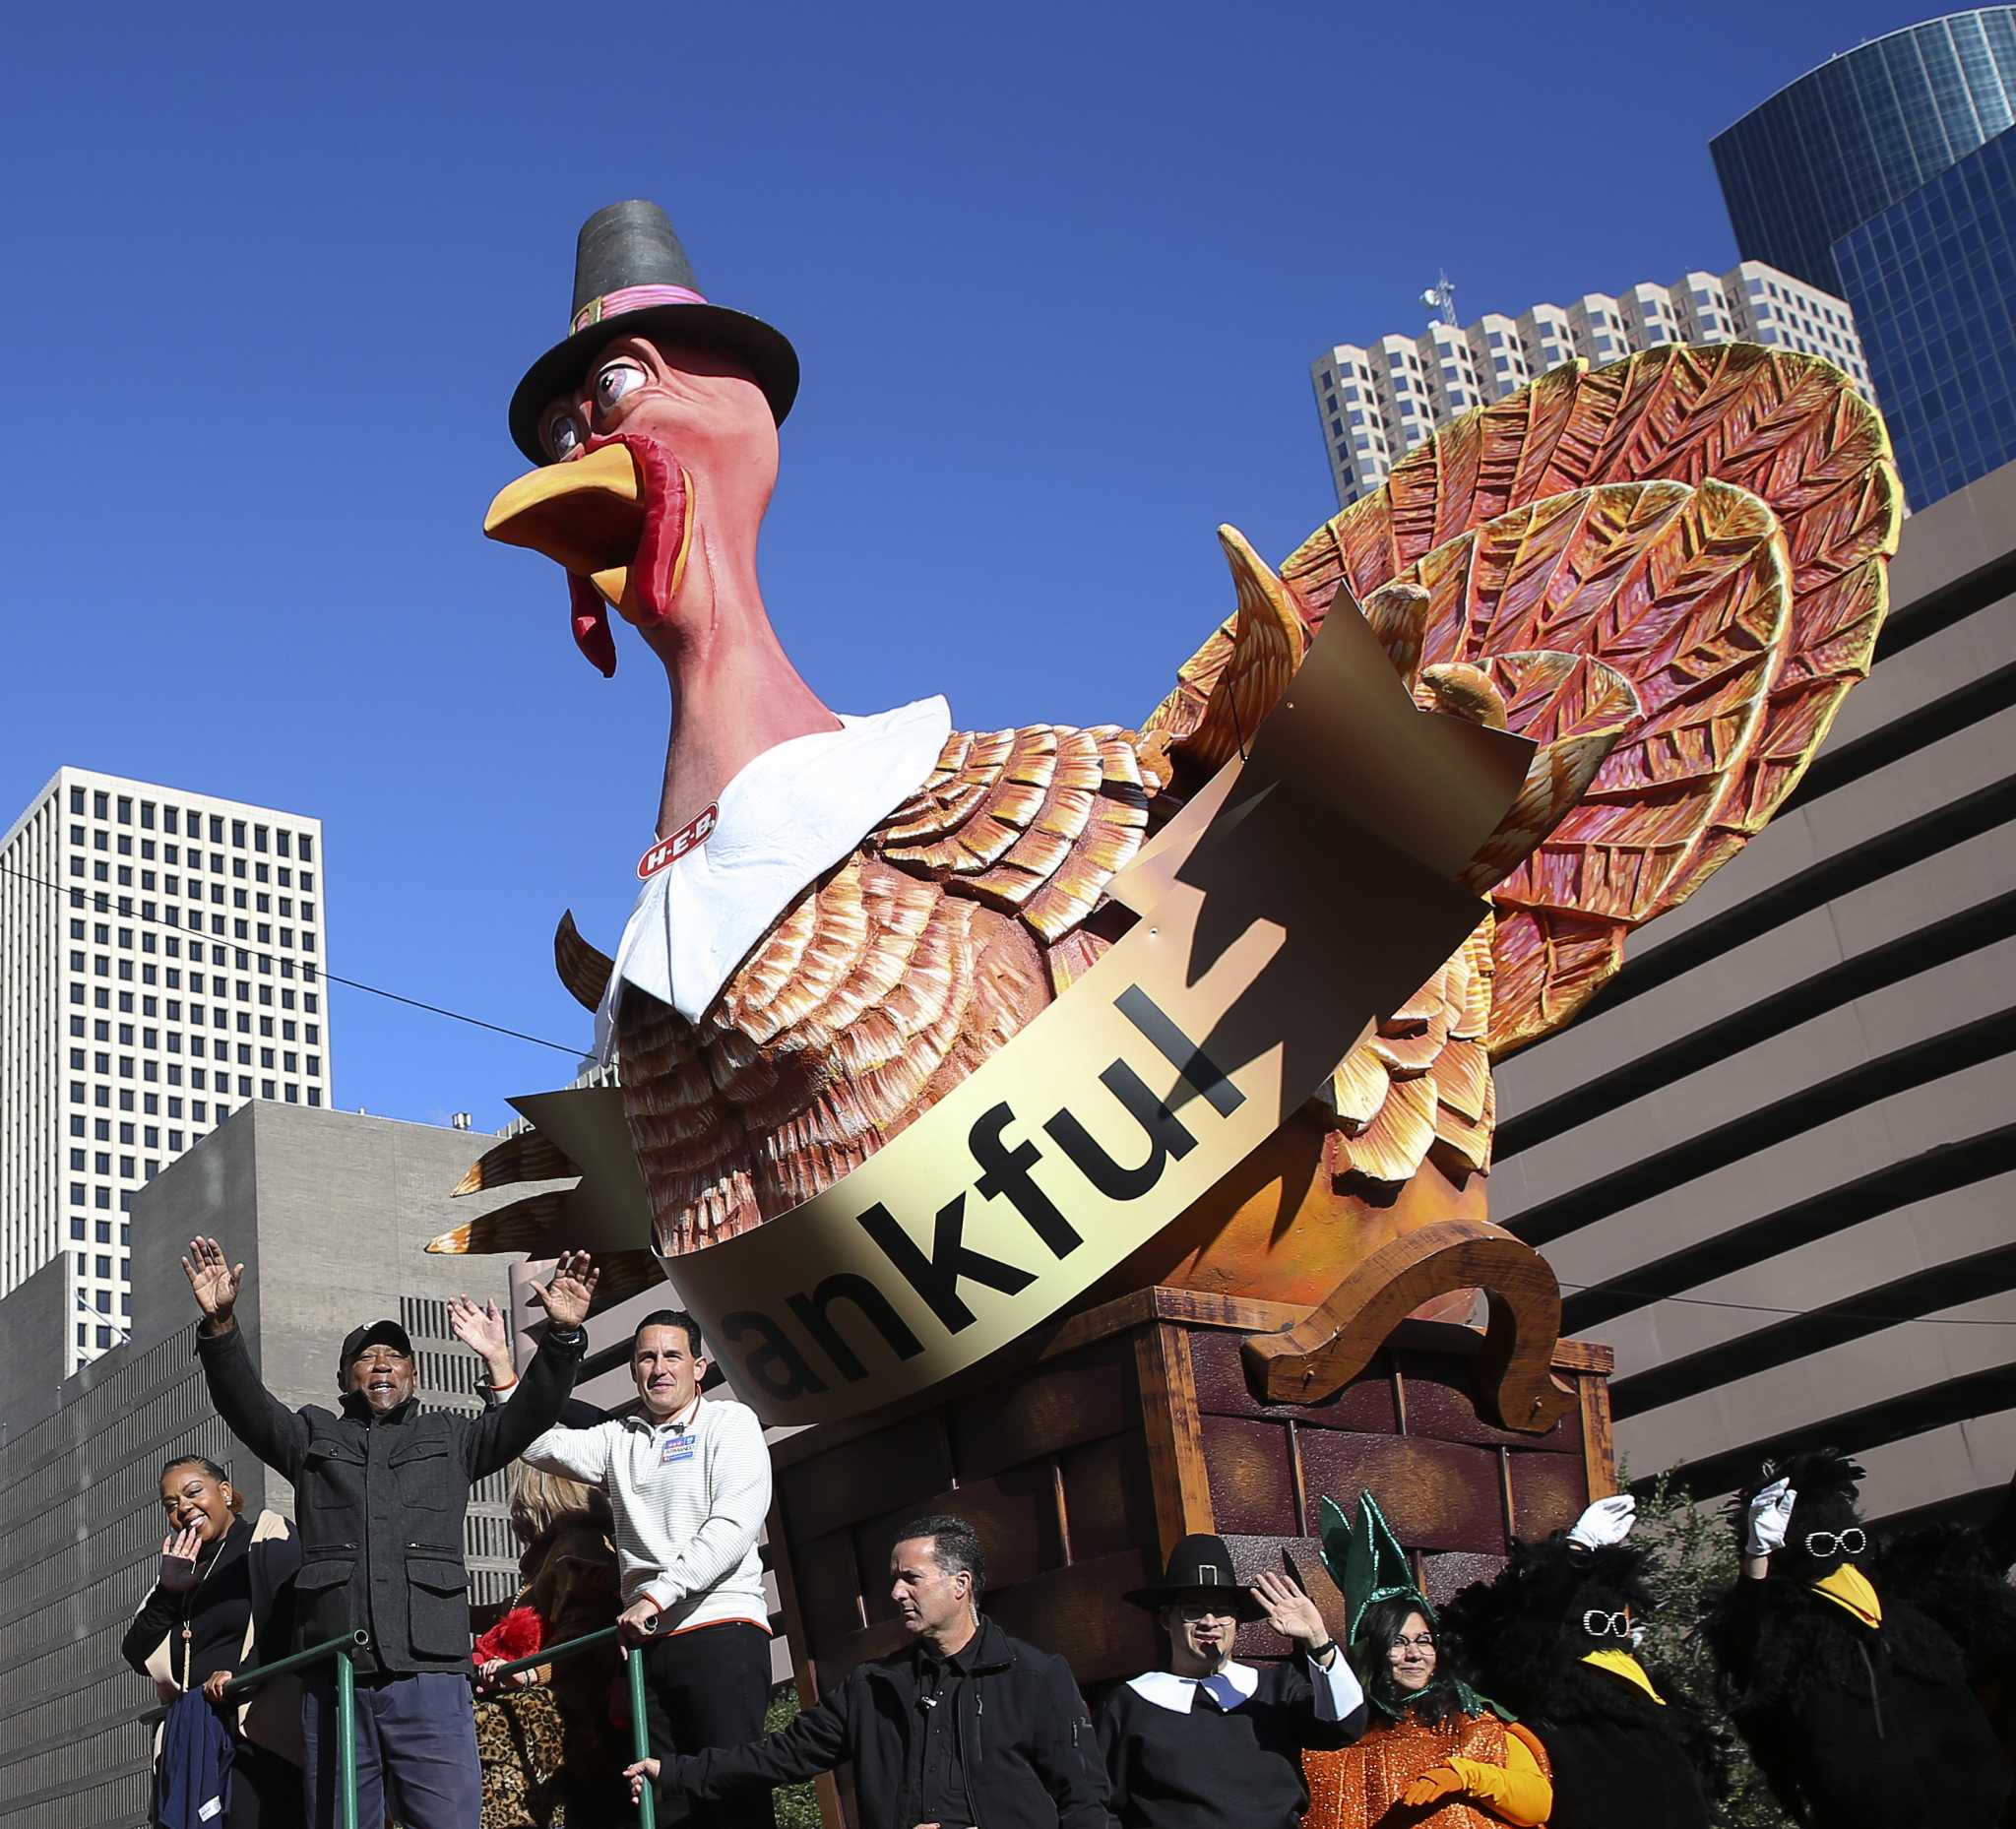 Houston Tradition Lives On: 68th Annual H-E-B Thanksgiving Day Parade